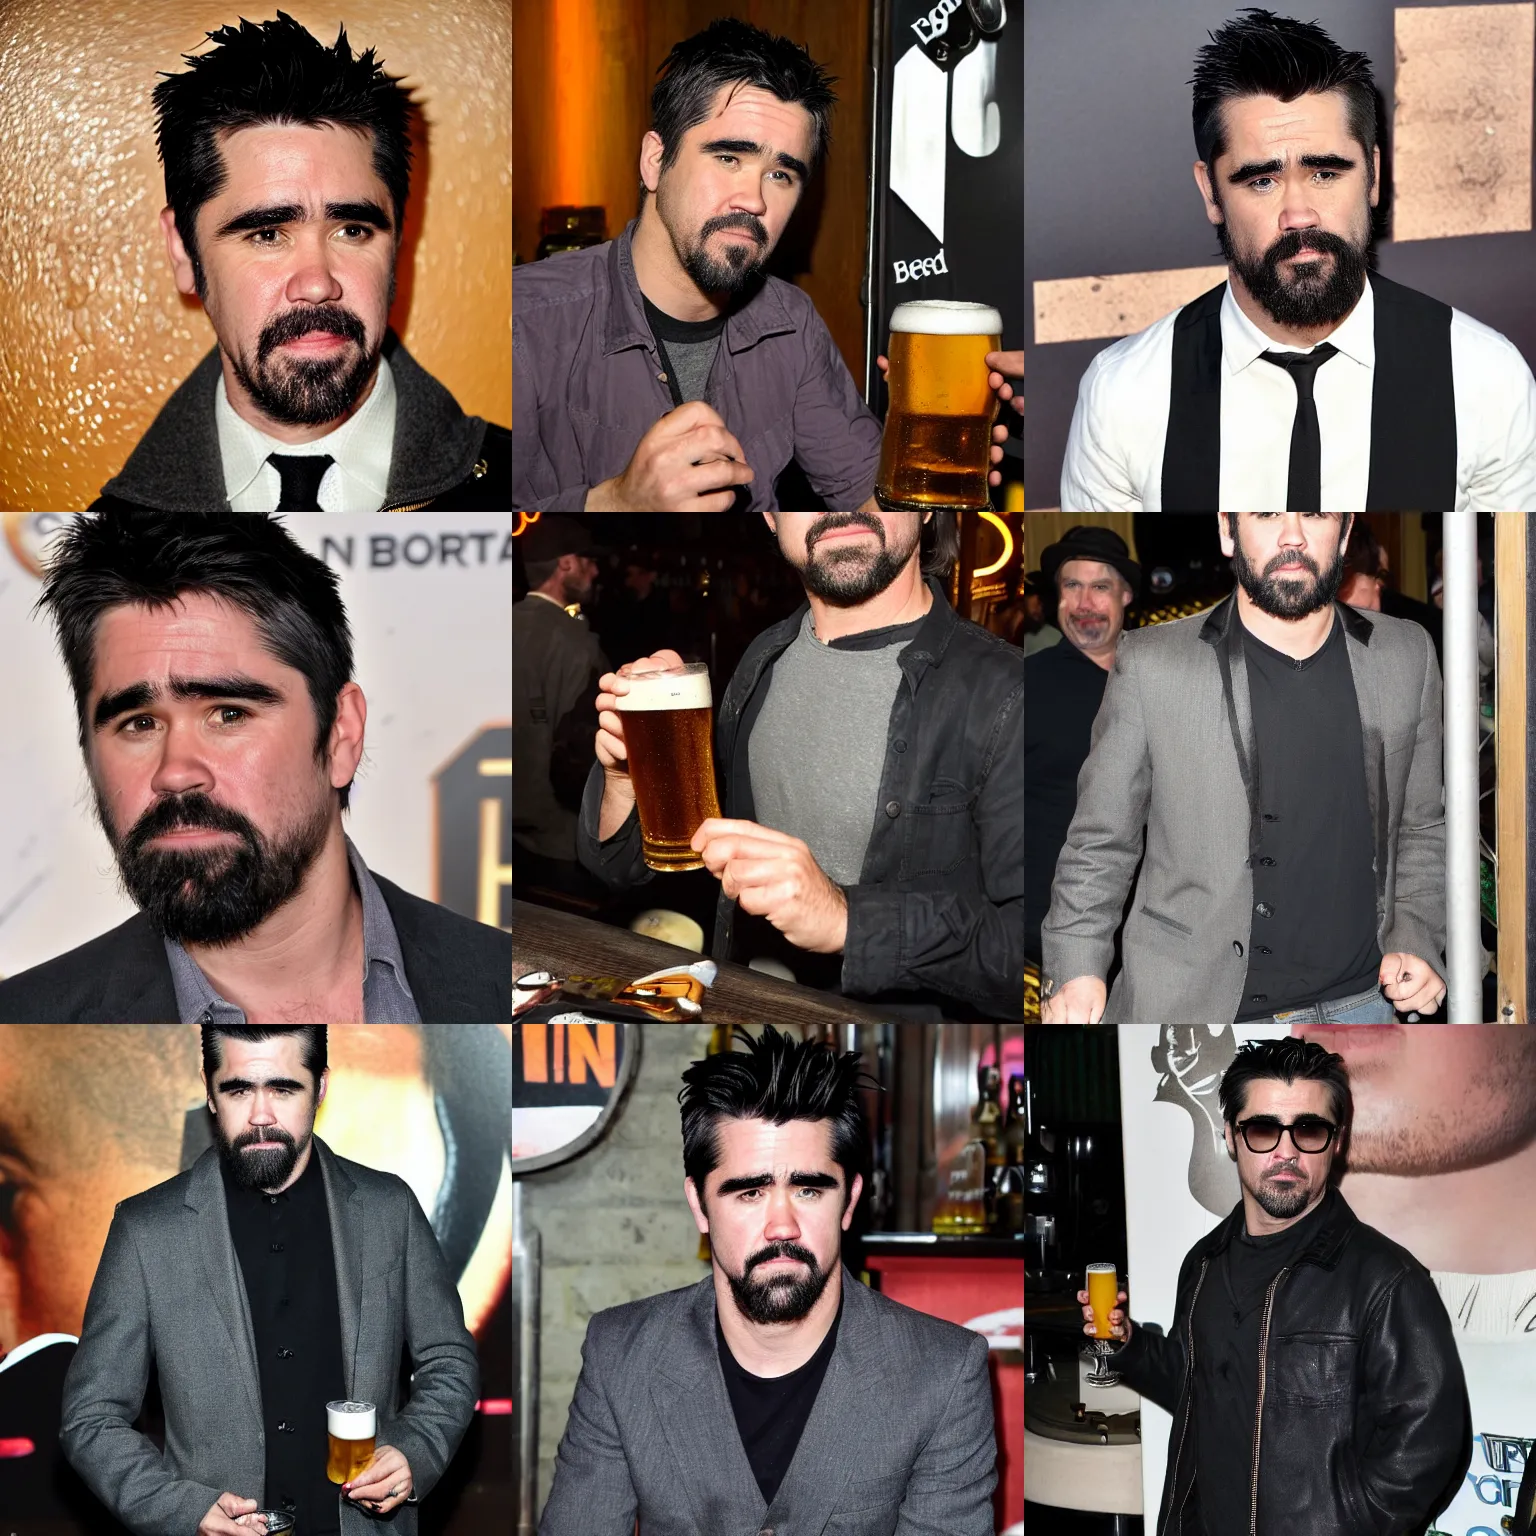 Prompt: colin farrel with black forked braid beard thick eyebrows drinking a pint of beer